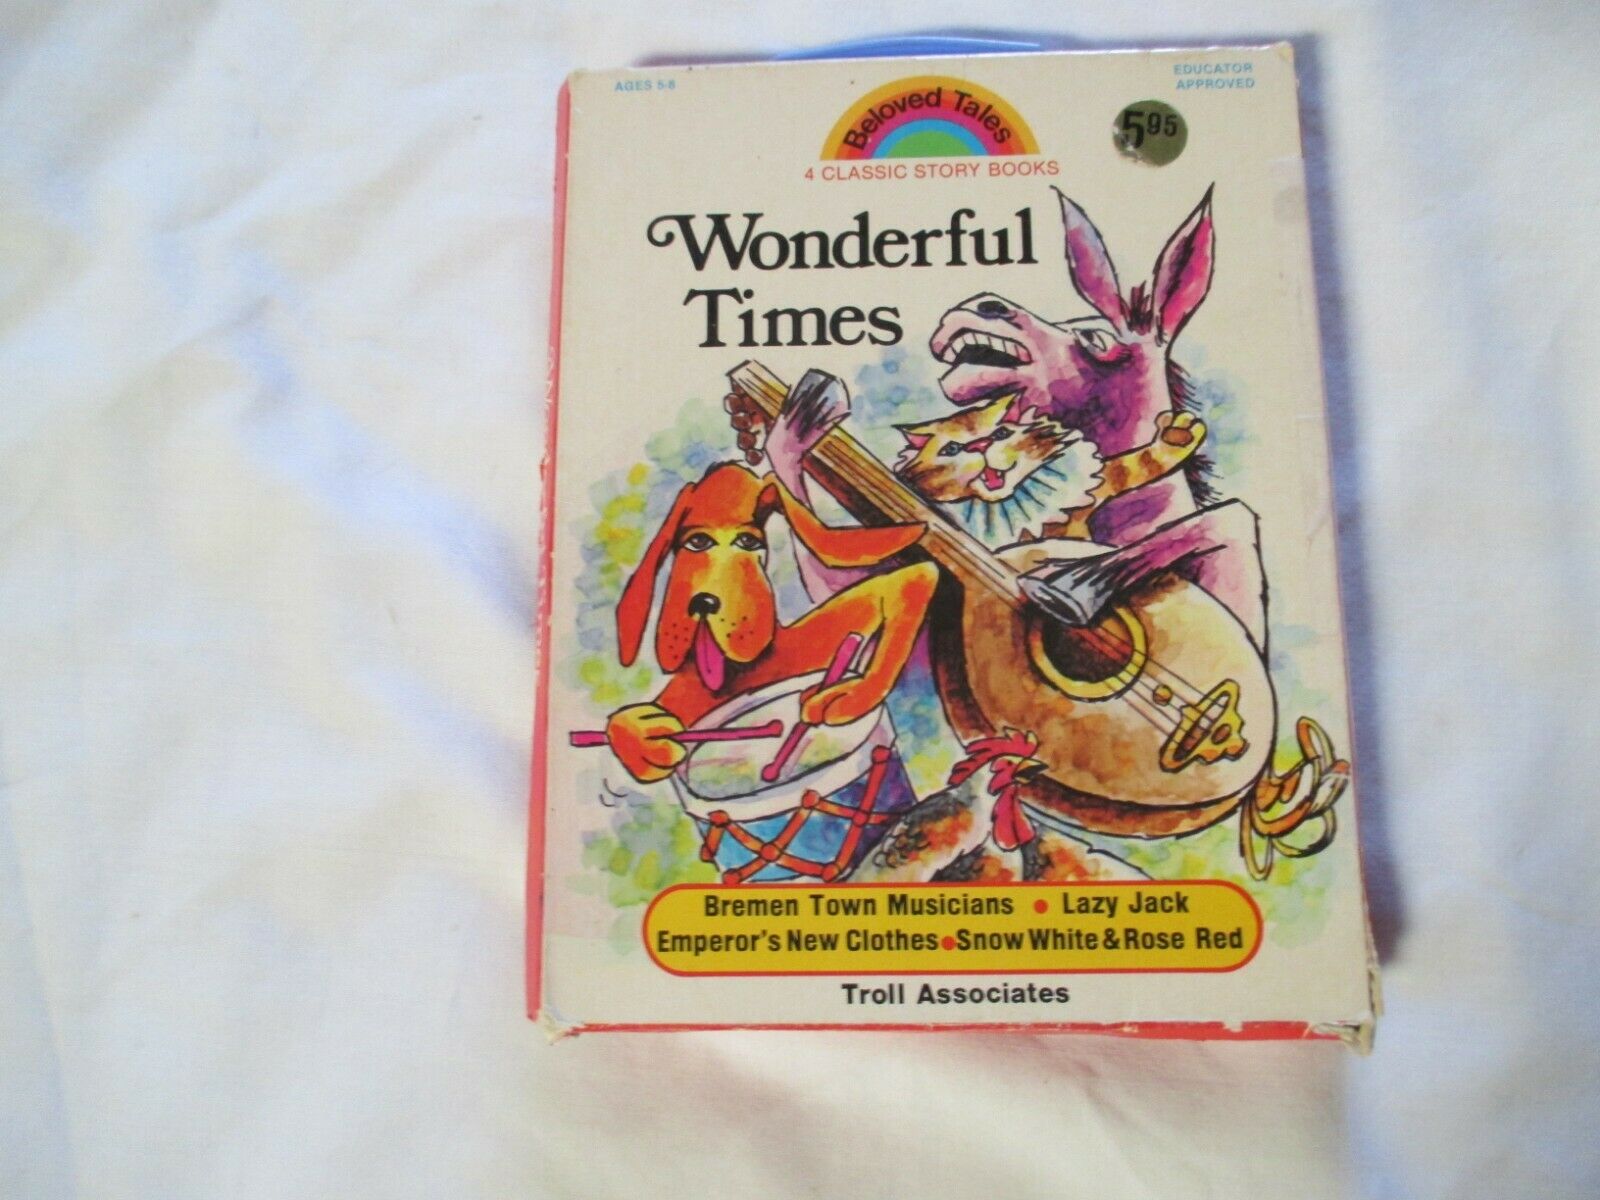 WONDERFUL TIMES - A COLLECTION OF FOUR STORY BOOKS (PAPERBACK)